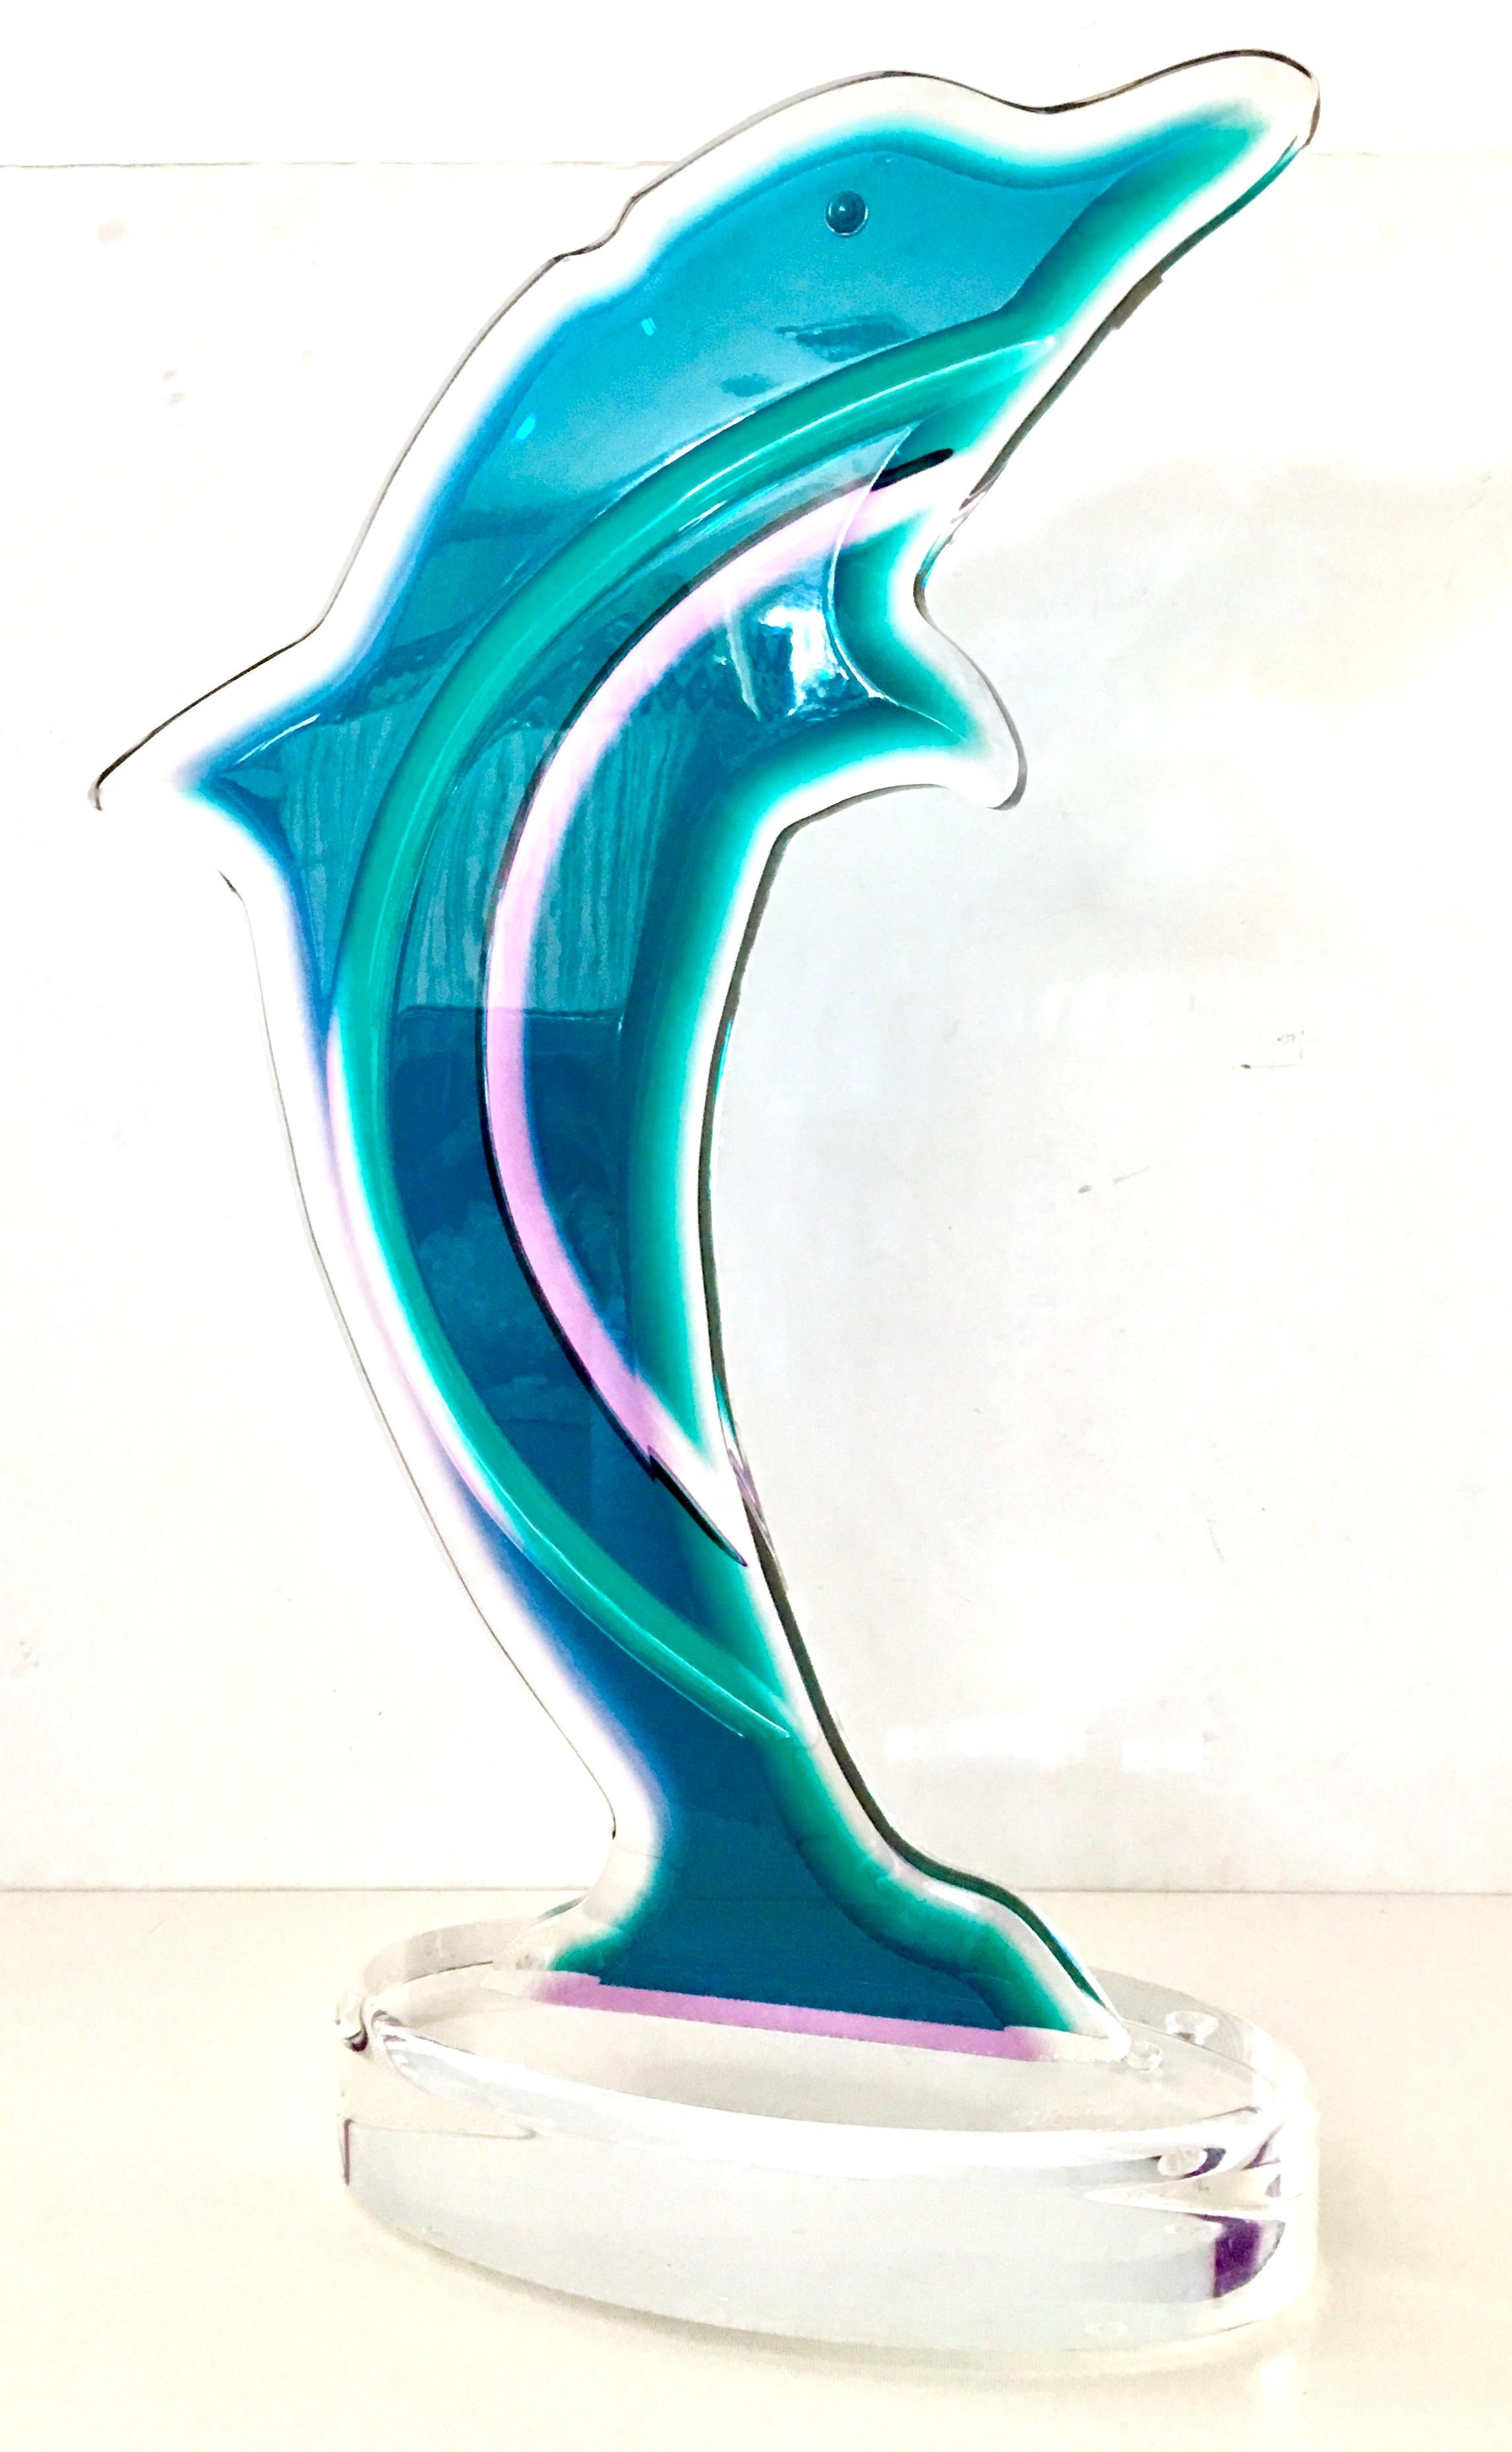 1999 monumental carved Lucite dolphin sculpture by, Muniz. Executed in teal, purple and transparent with great attention to detail. Signed on the transparent base, Muniz 99.
Muniz is a family owned business, located in Miami Florida and fabricates